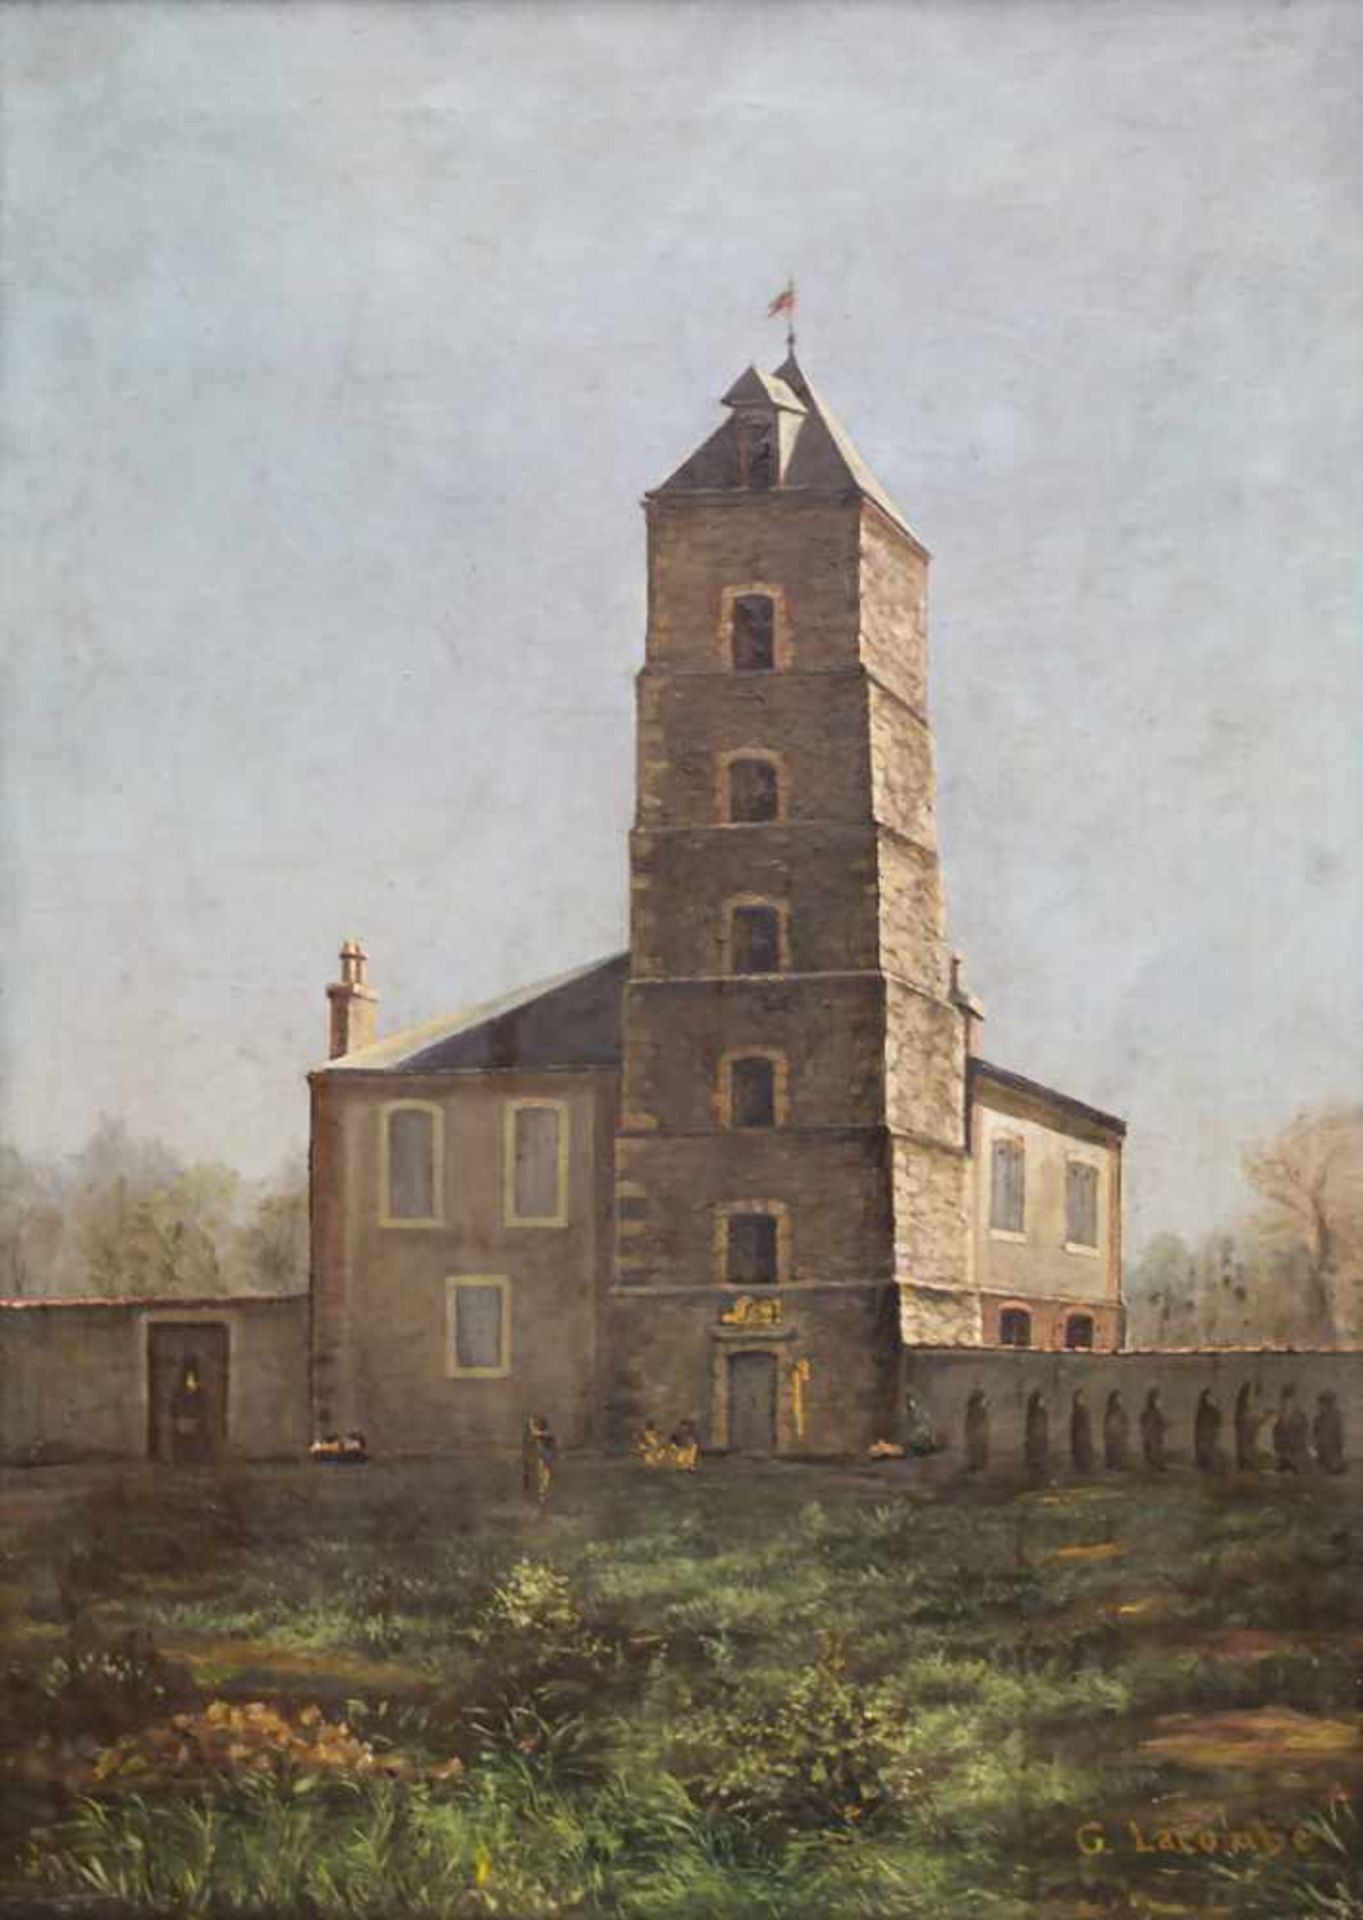 G. Lacombe (19./20. Jh.), 'Klosteransicht mit Mönchen' / 'A view of a monastery with monks'